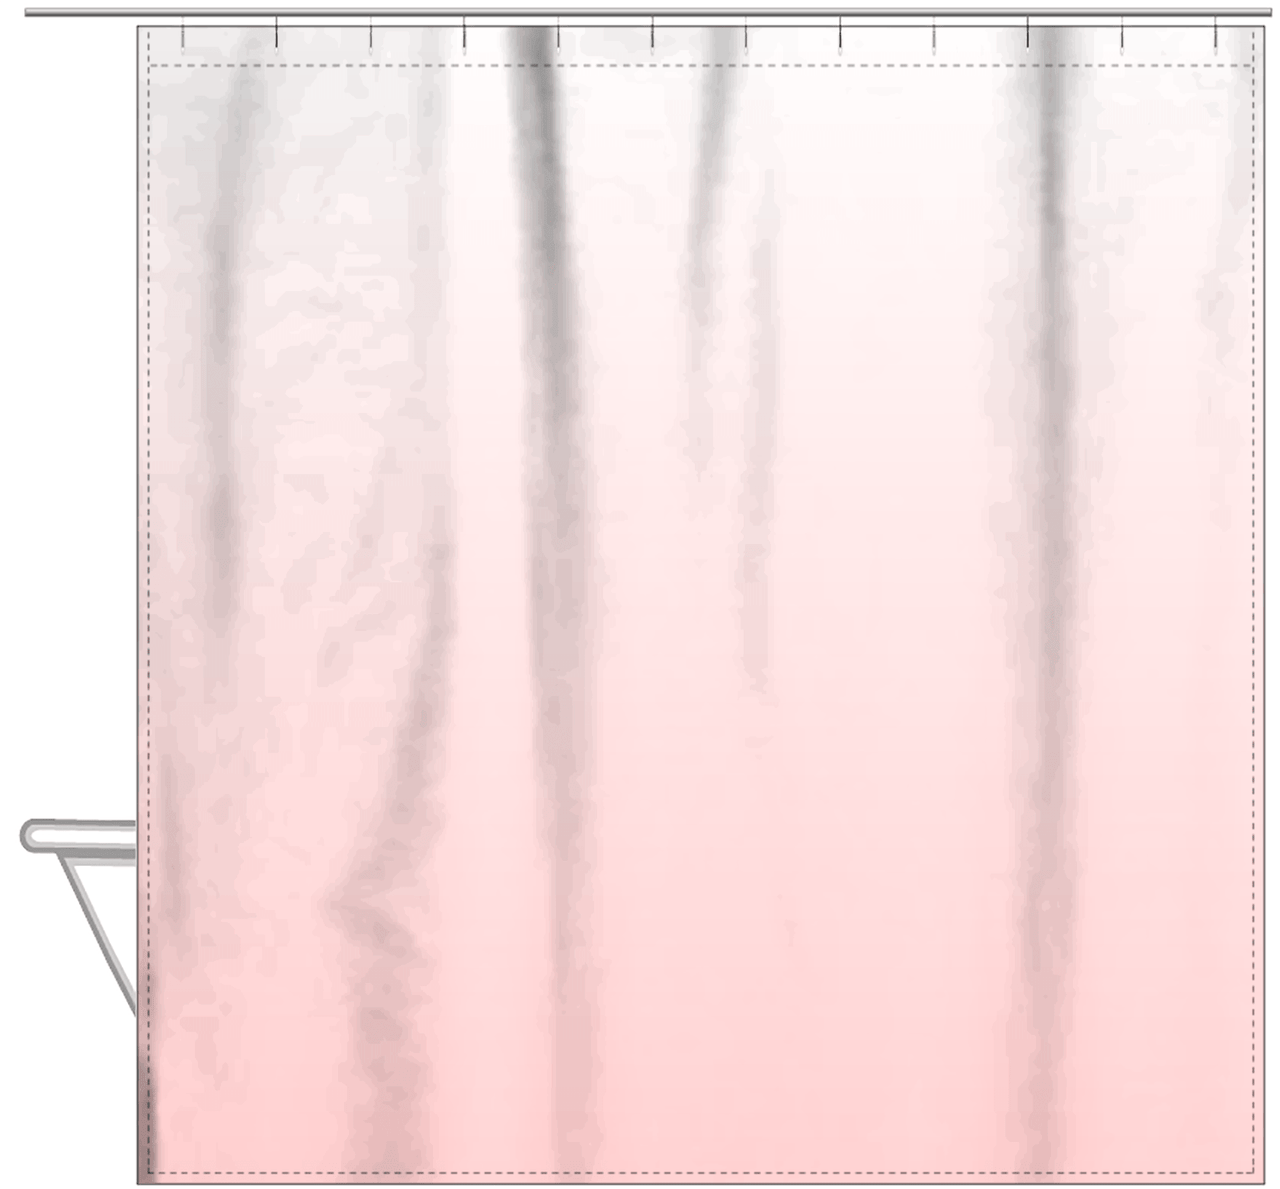 Personalized Ombre Shower Curtain - Pink and White - No Default Text - Ombre I - Hanging View